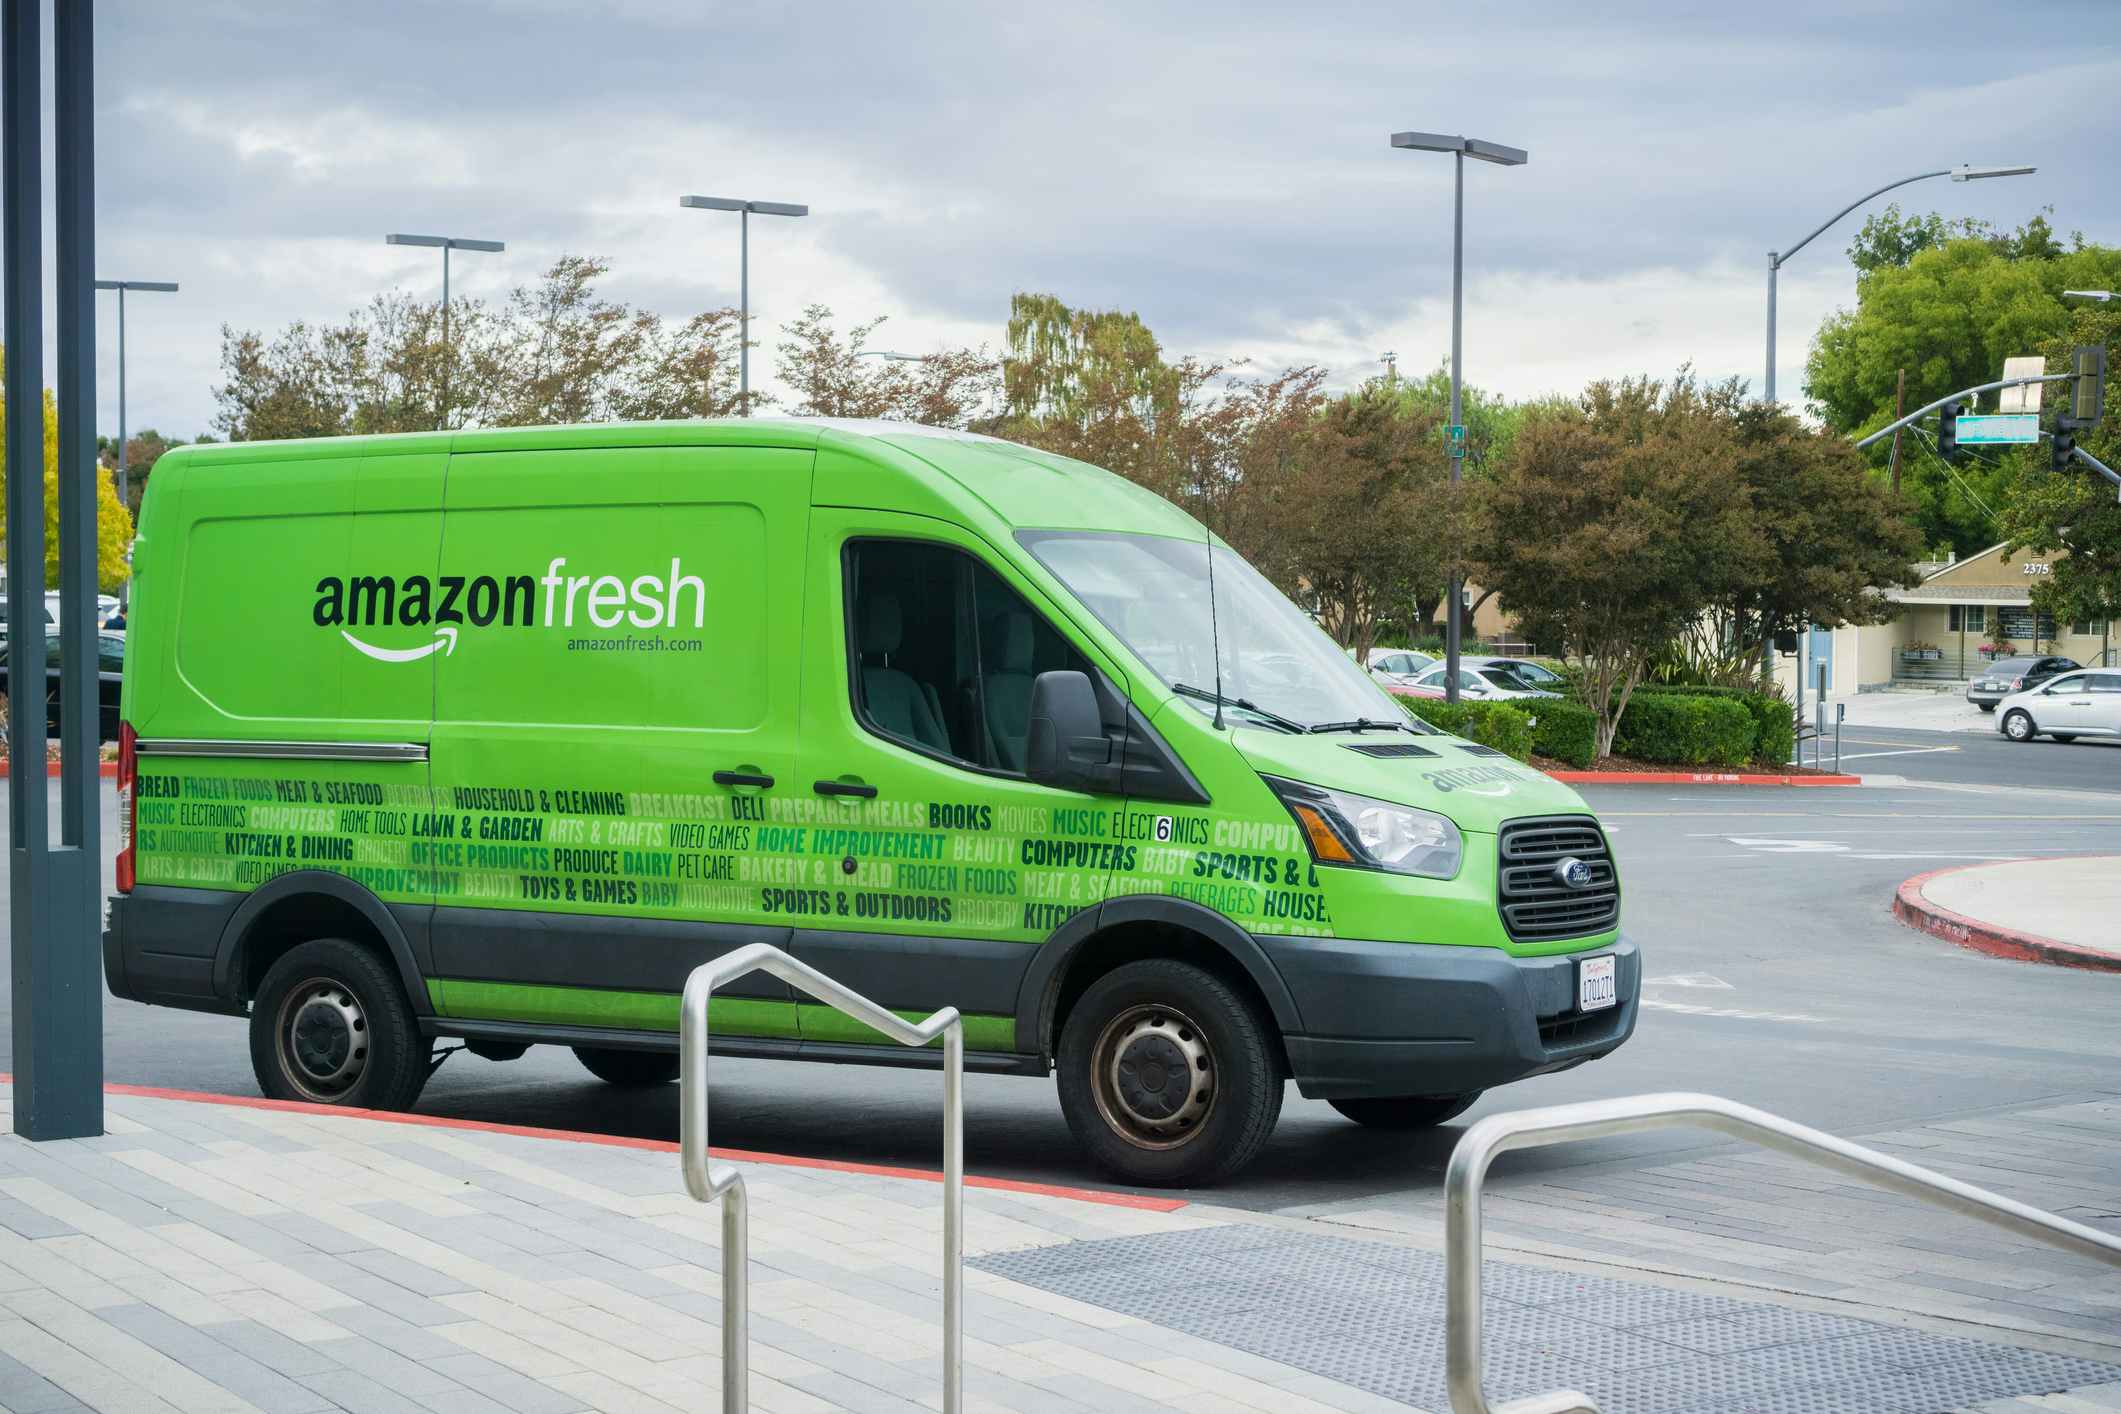 An Amazon fresh van parked by a curb.